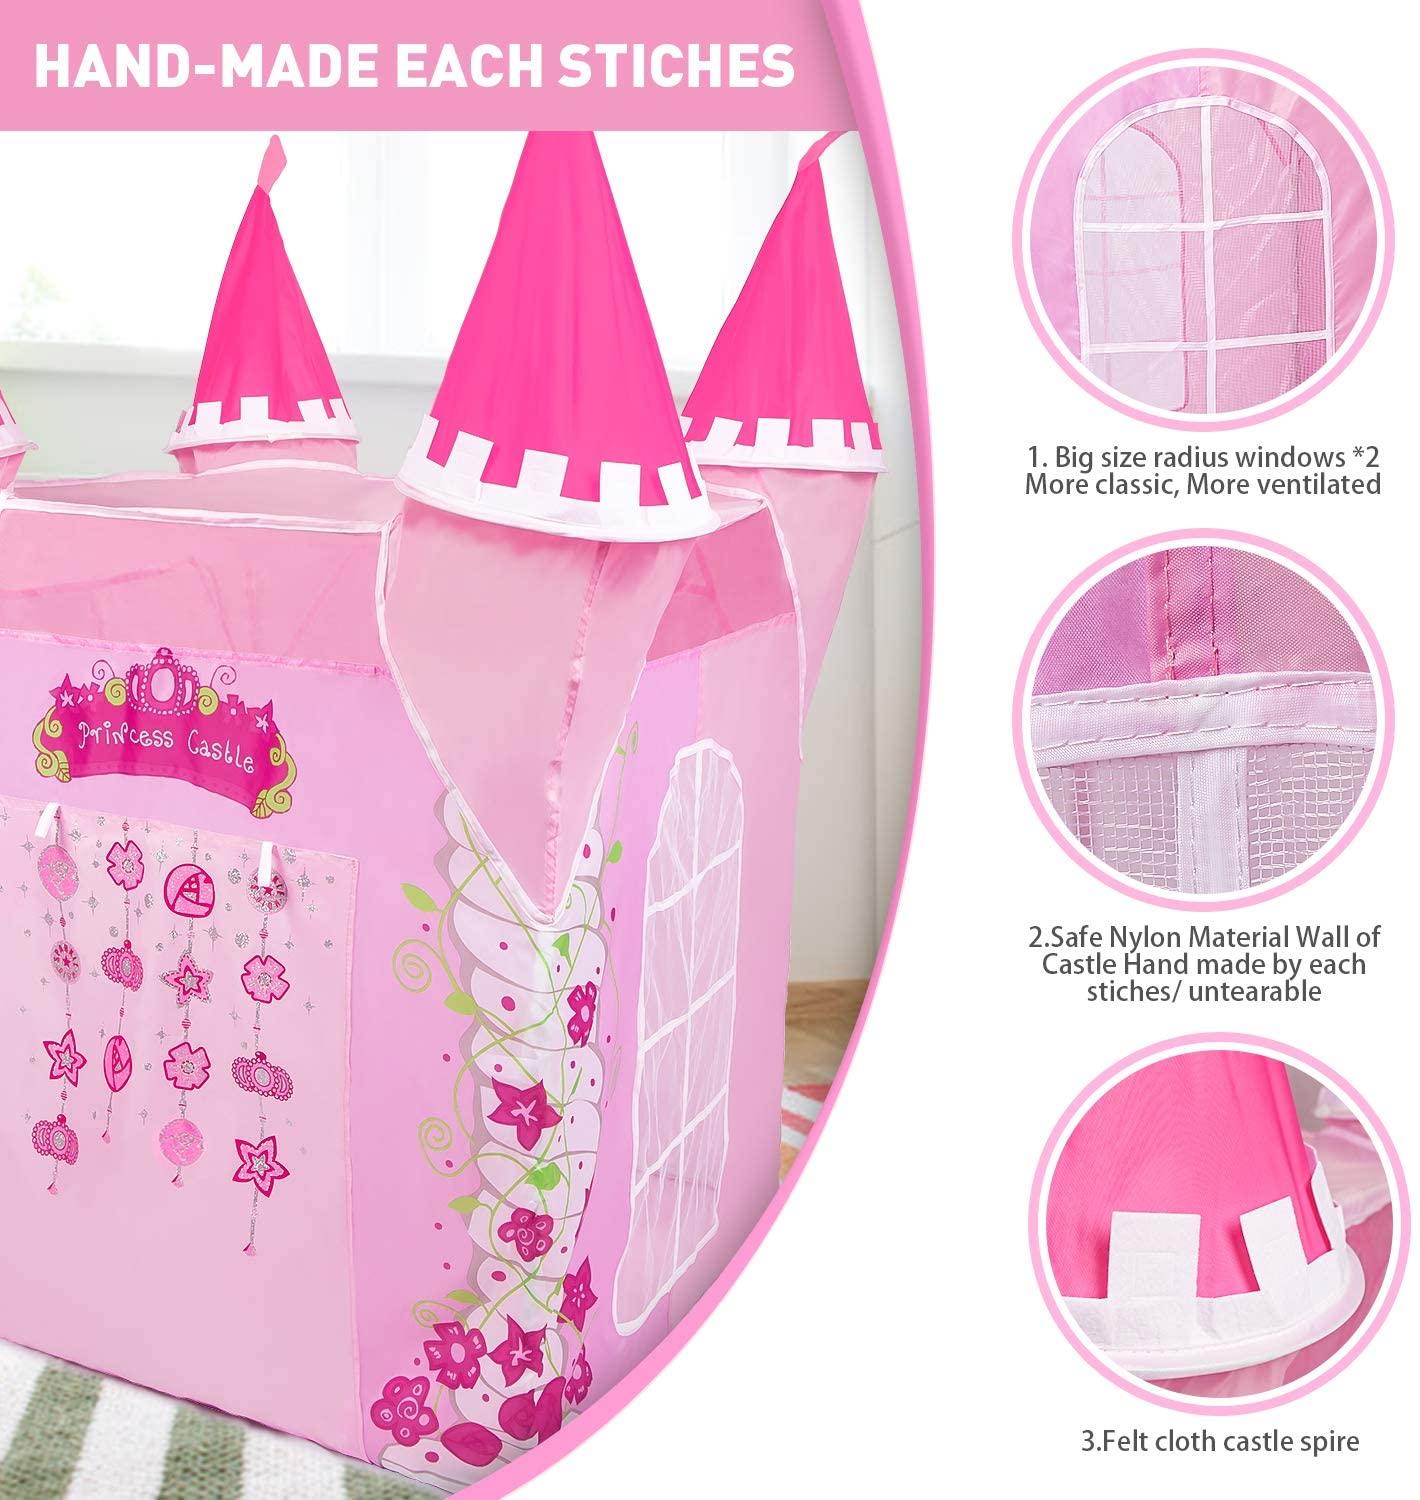 New-Child-Toys-Tents-Princess-Castle-Play-Tent-Girl-Princess-Play-House-Indoor-Outdoor-Kids-Housees-1